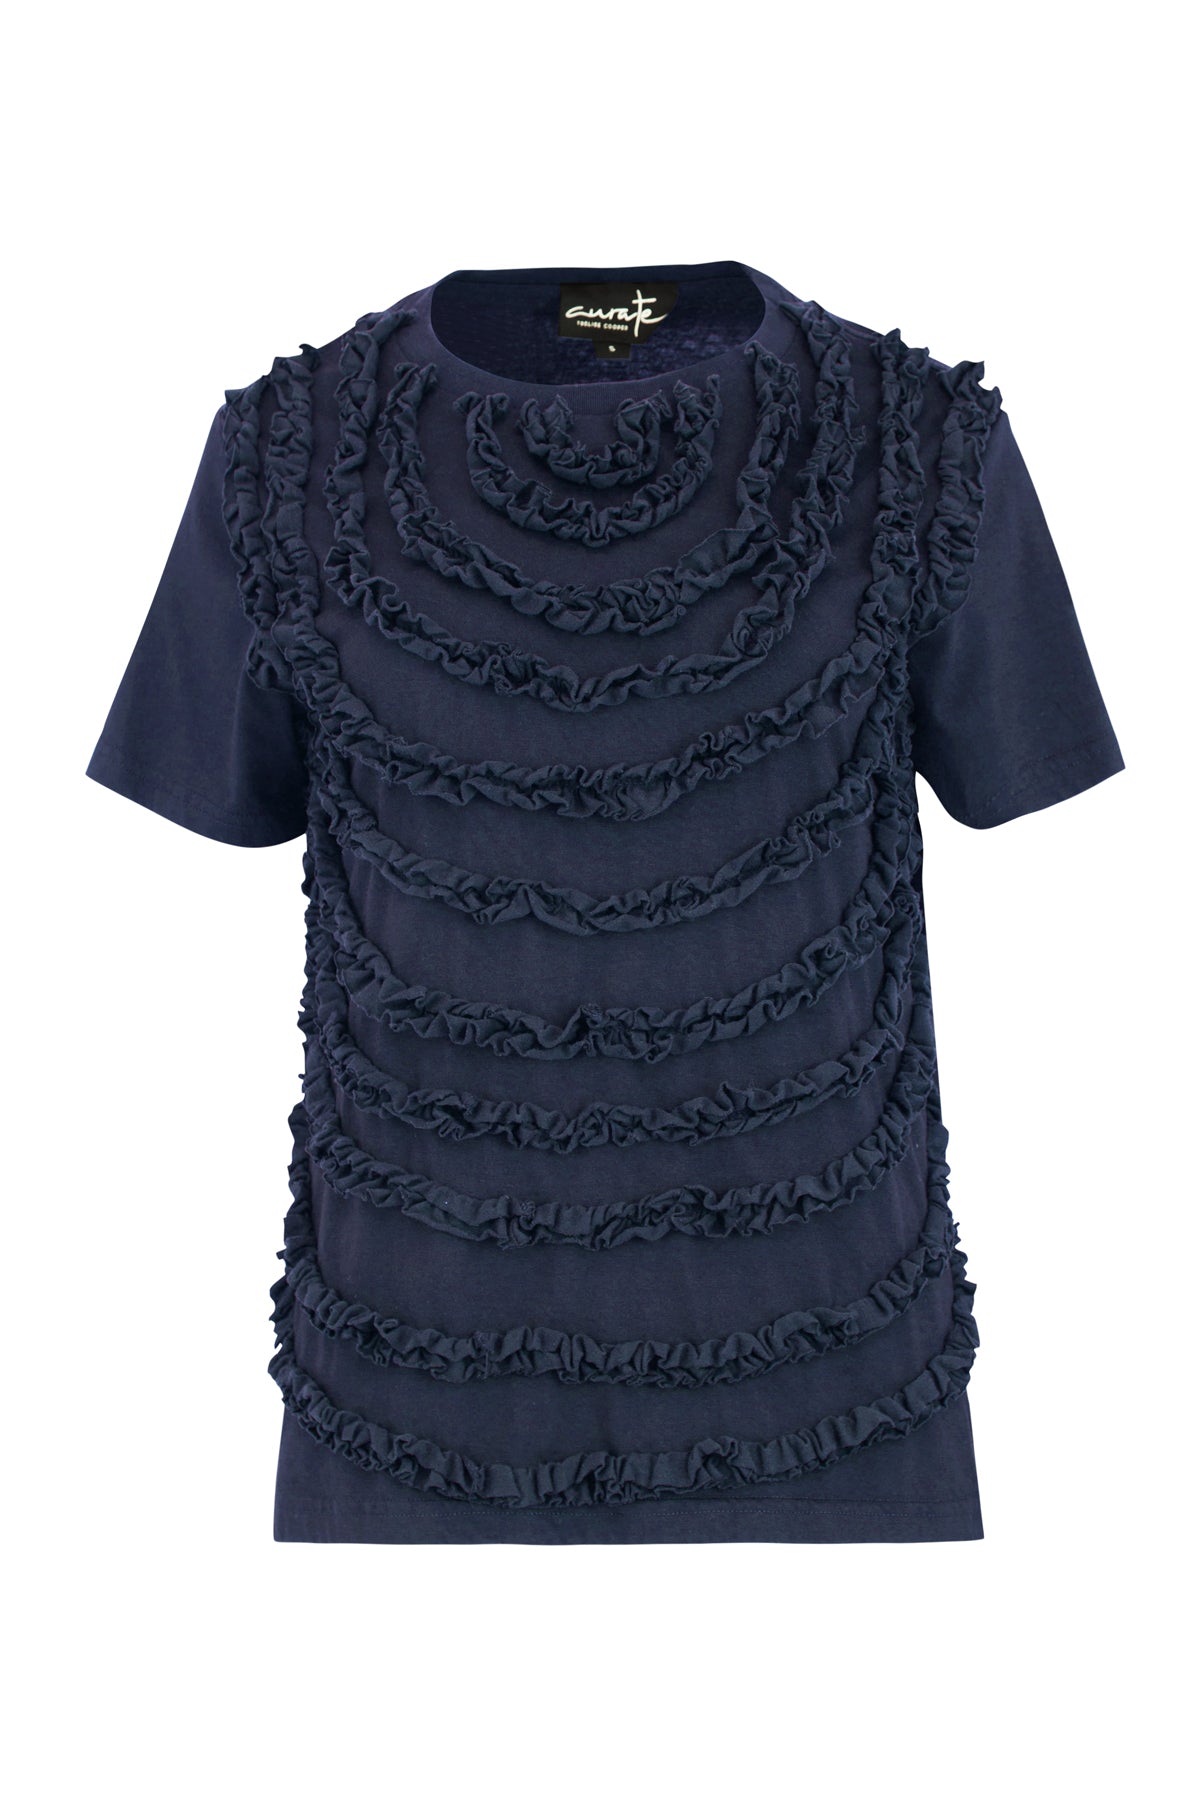 Curate - Ruffle it Up Top - Black